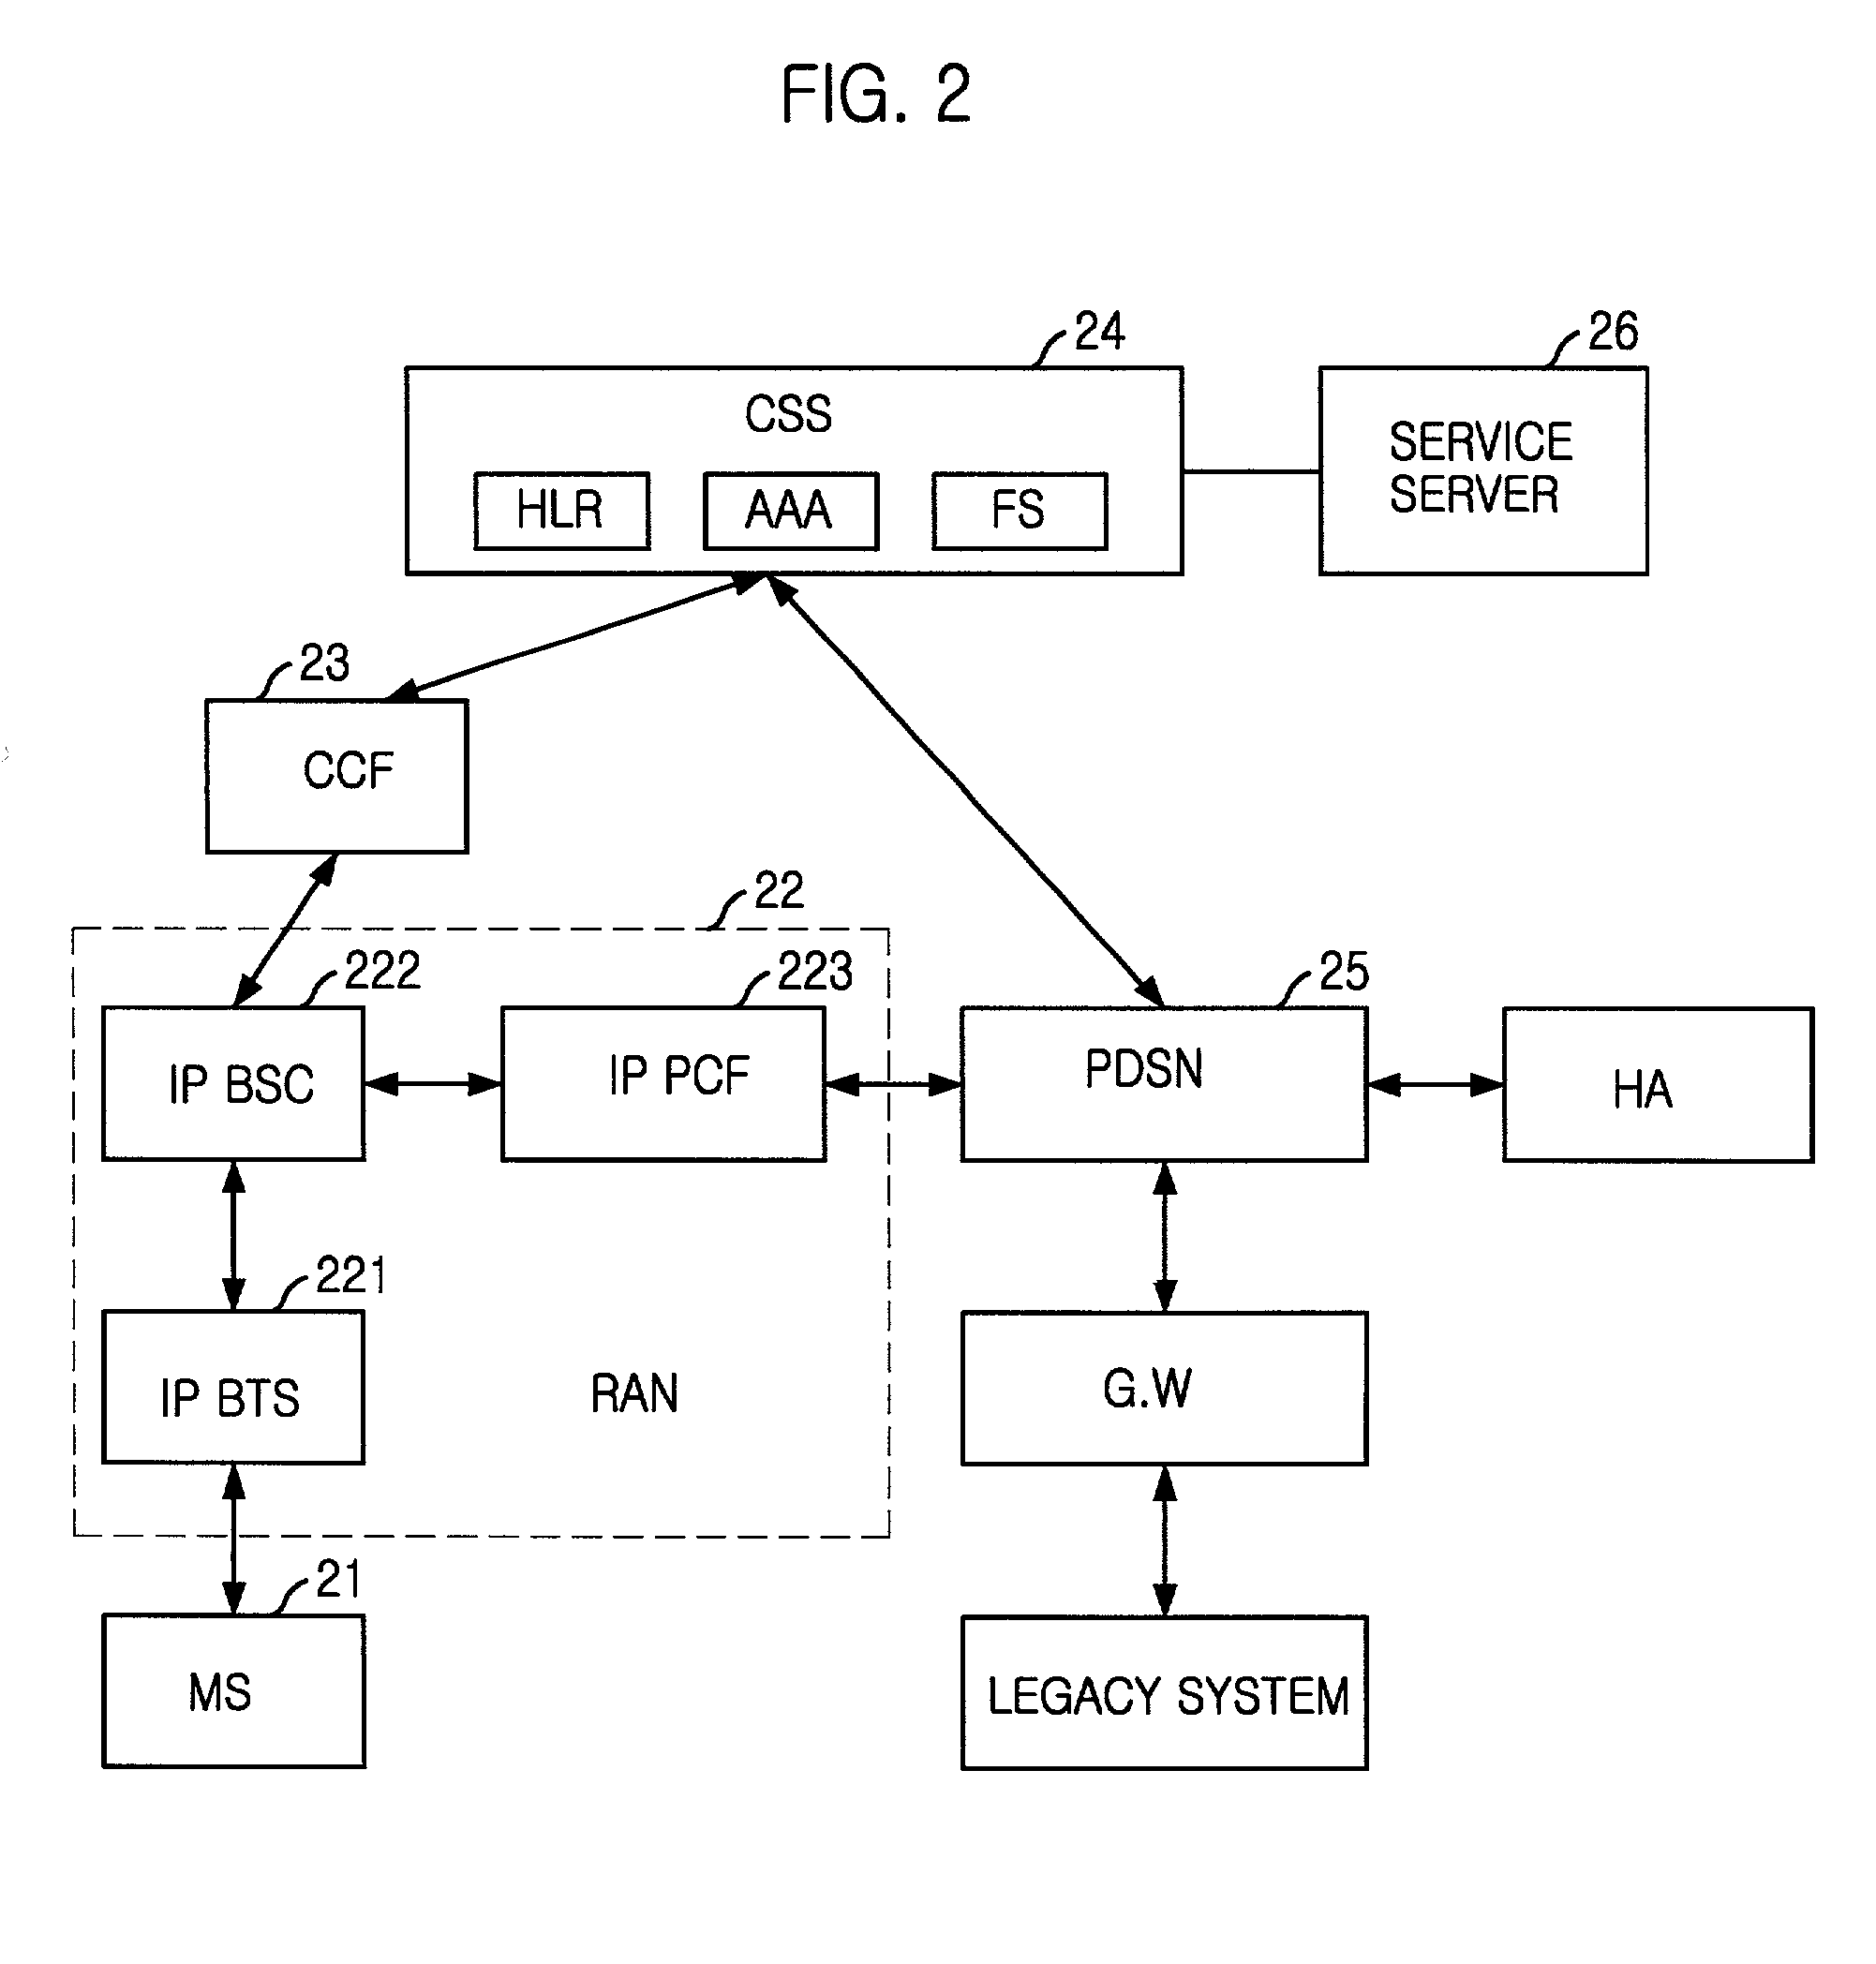 Common subscriber managing apparatus and method based on fuctional modeling of a common subscriber server for use in an ALL-IP network